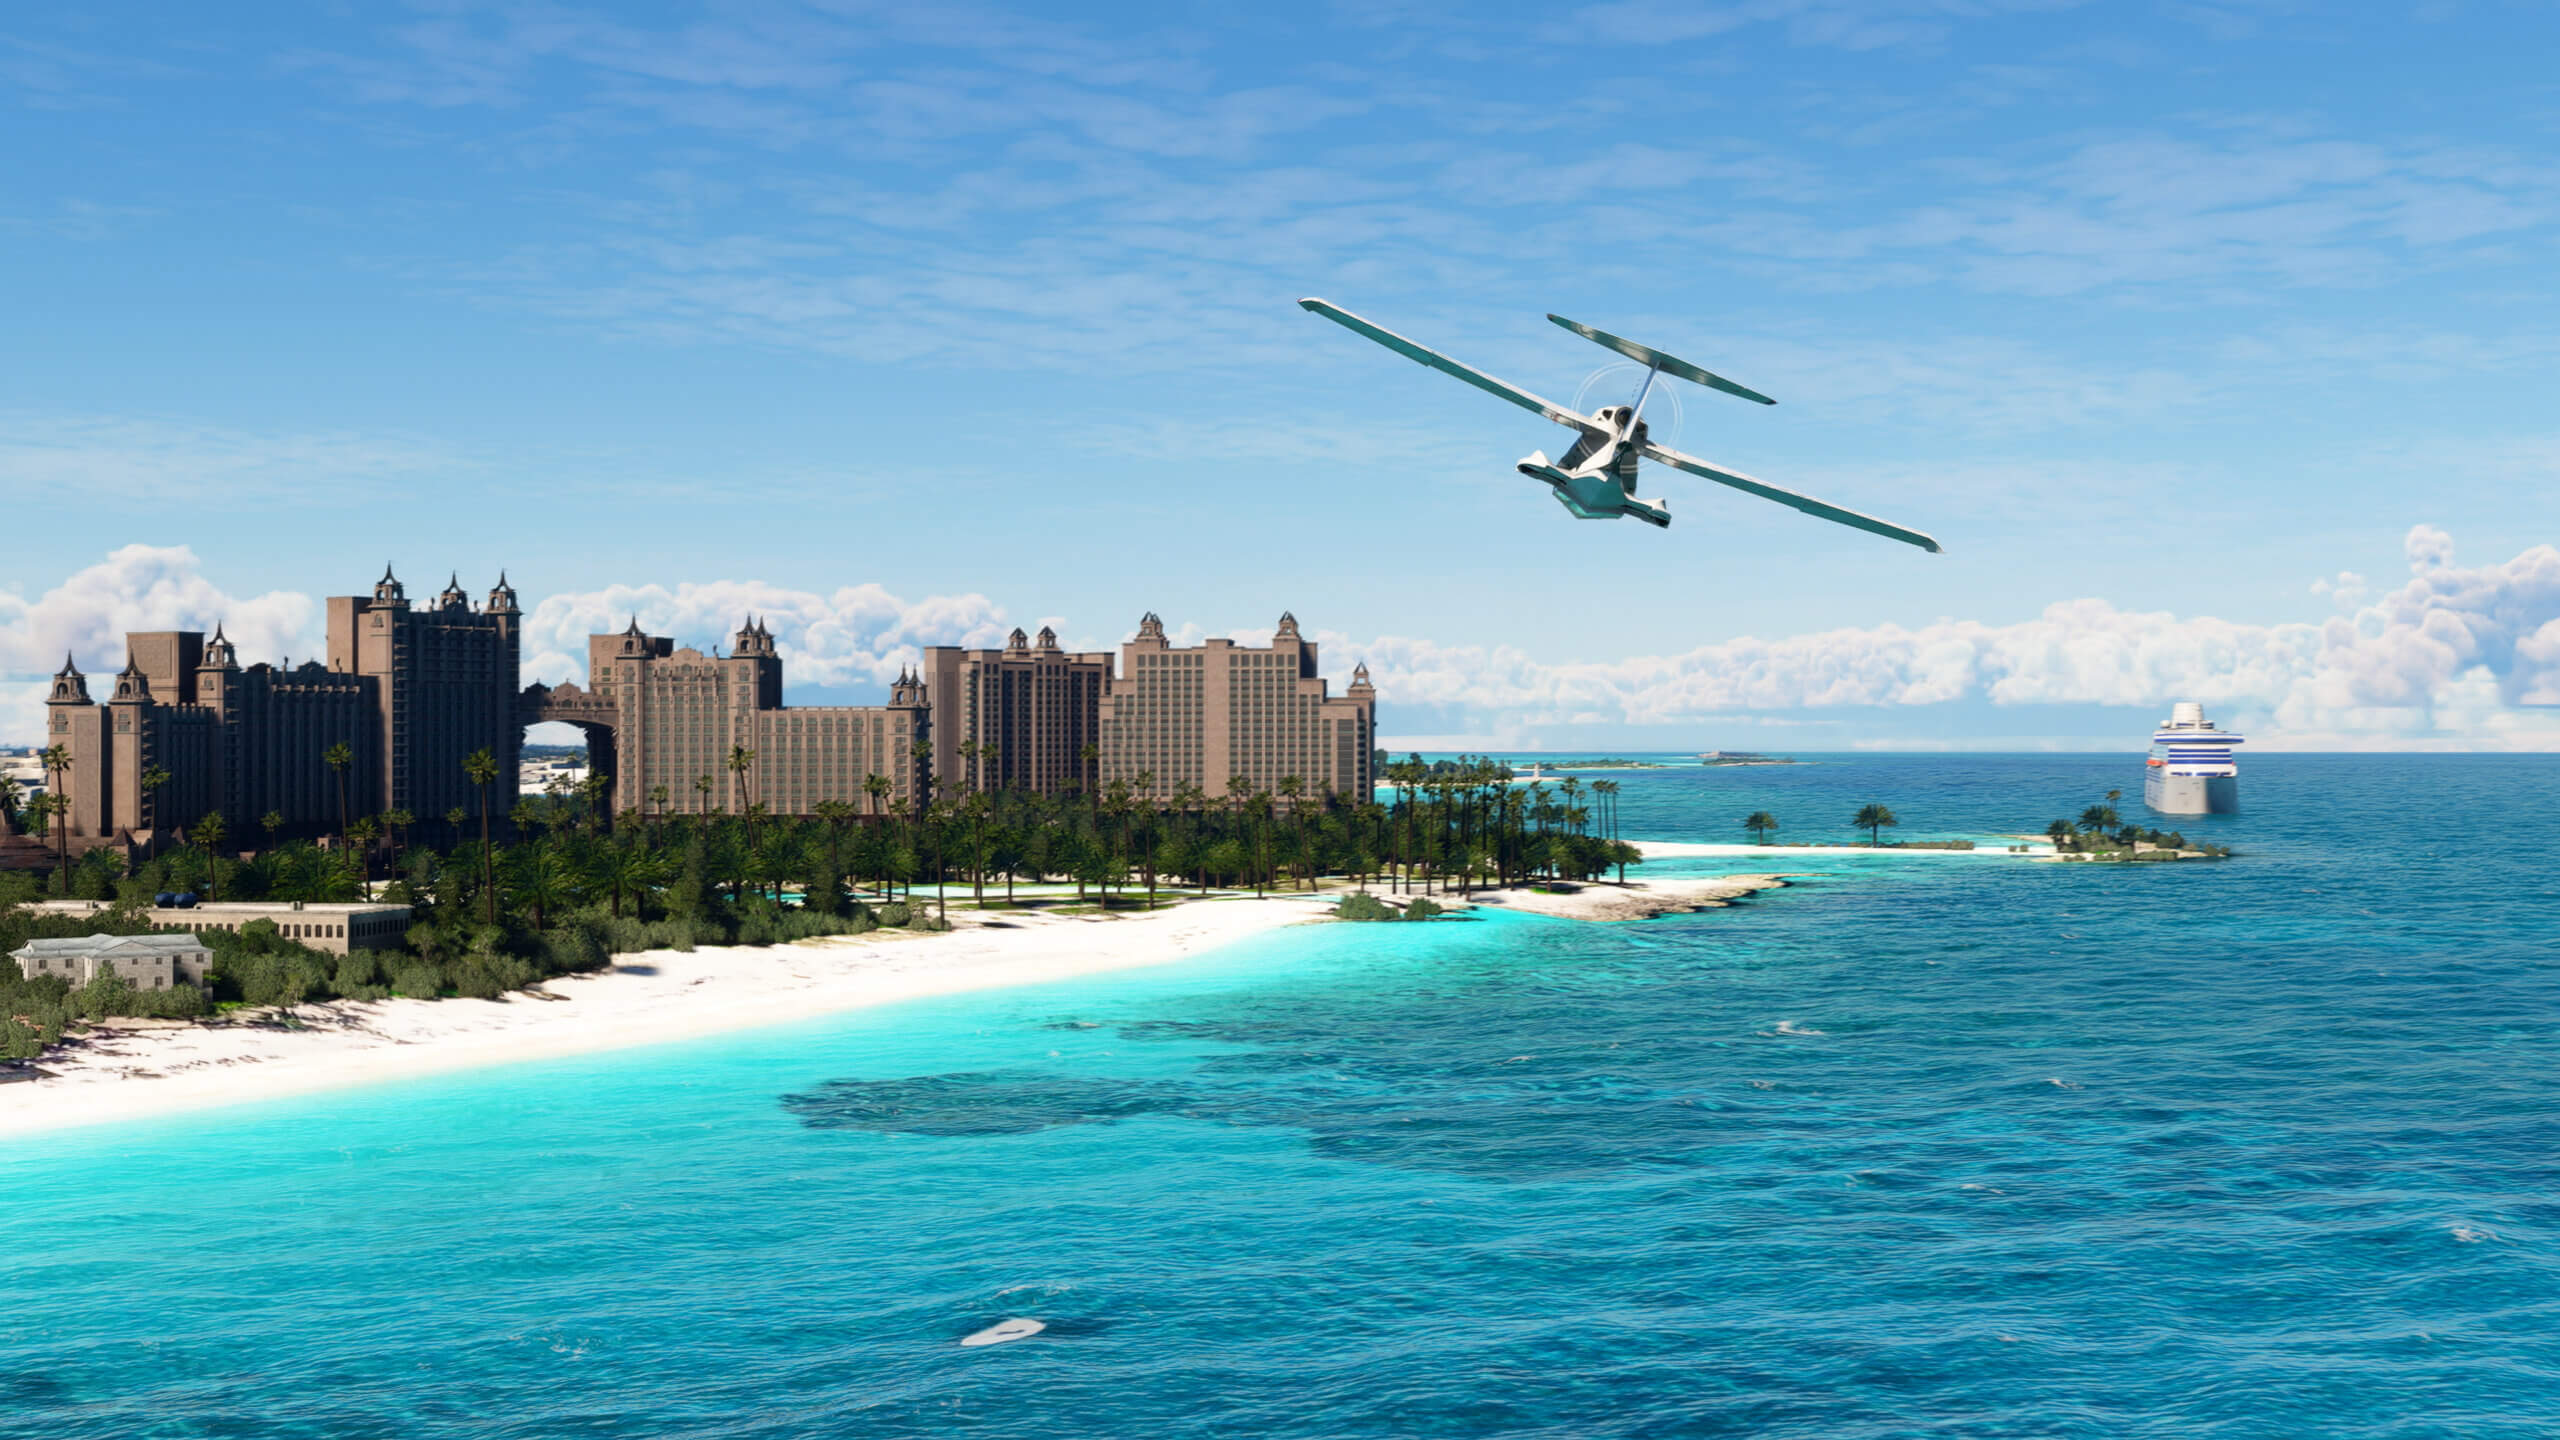 An ICON A5 flies over the Atlantis resort in the Bahamas